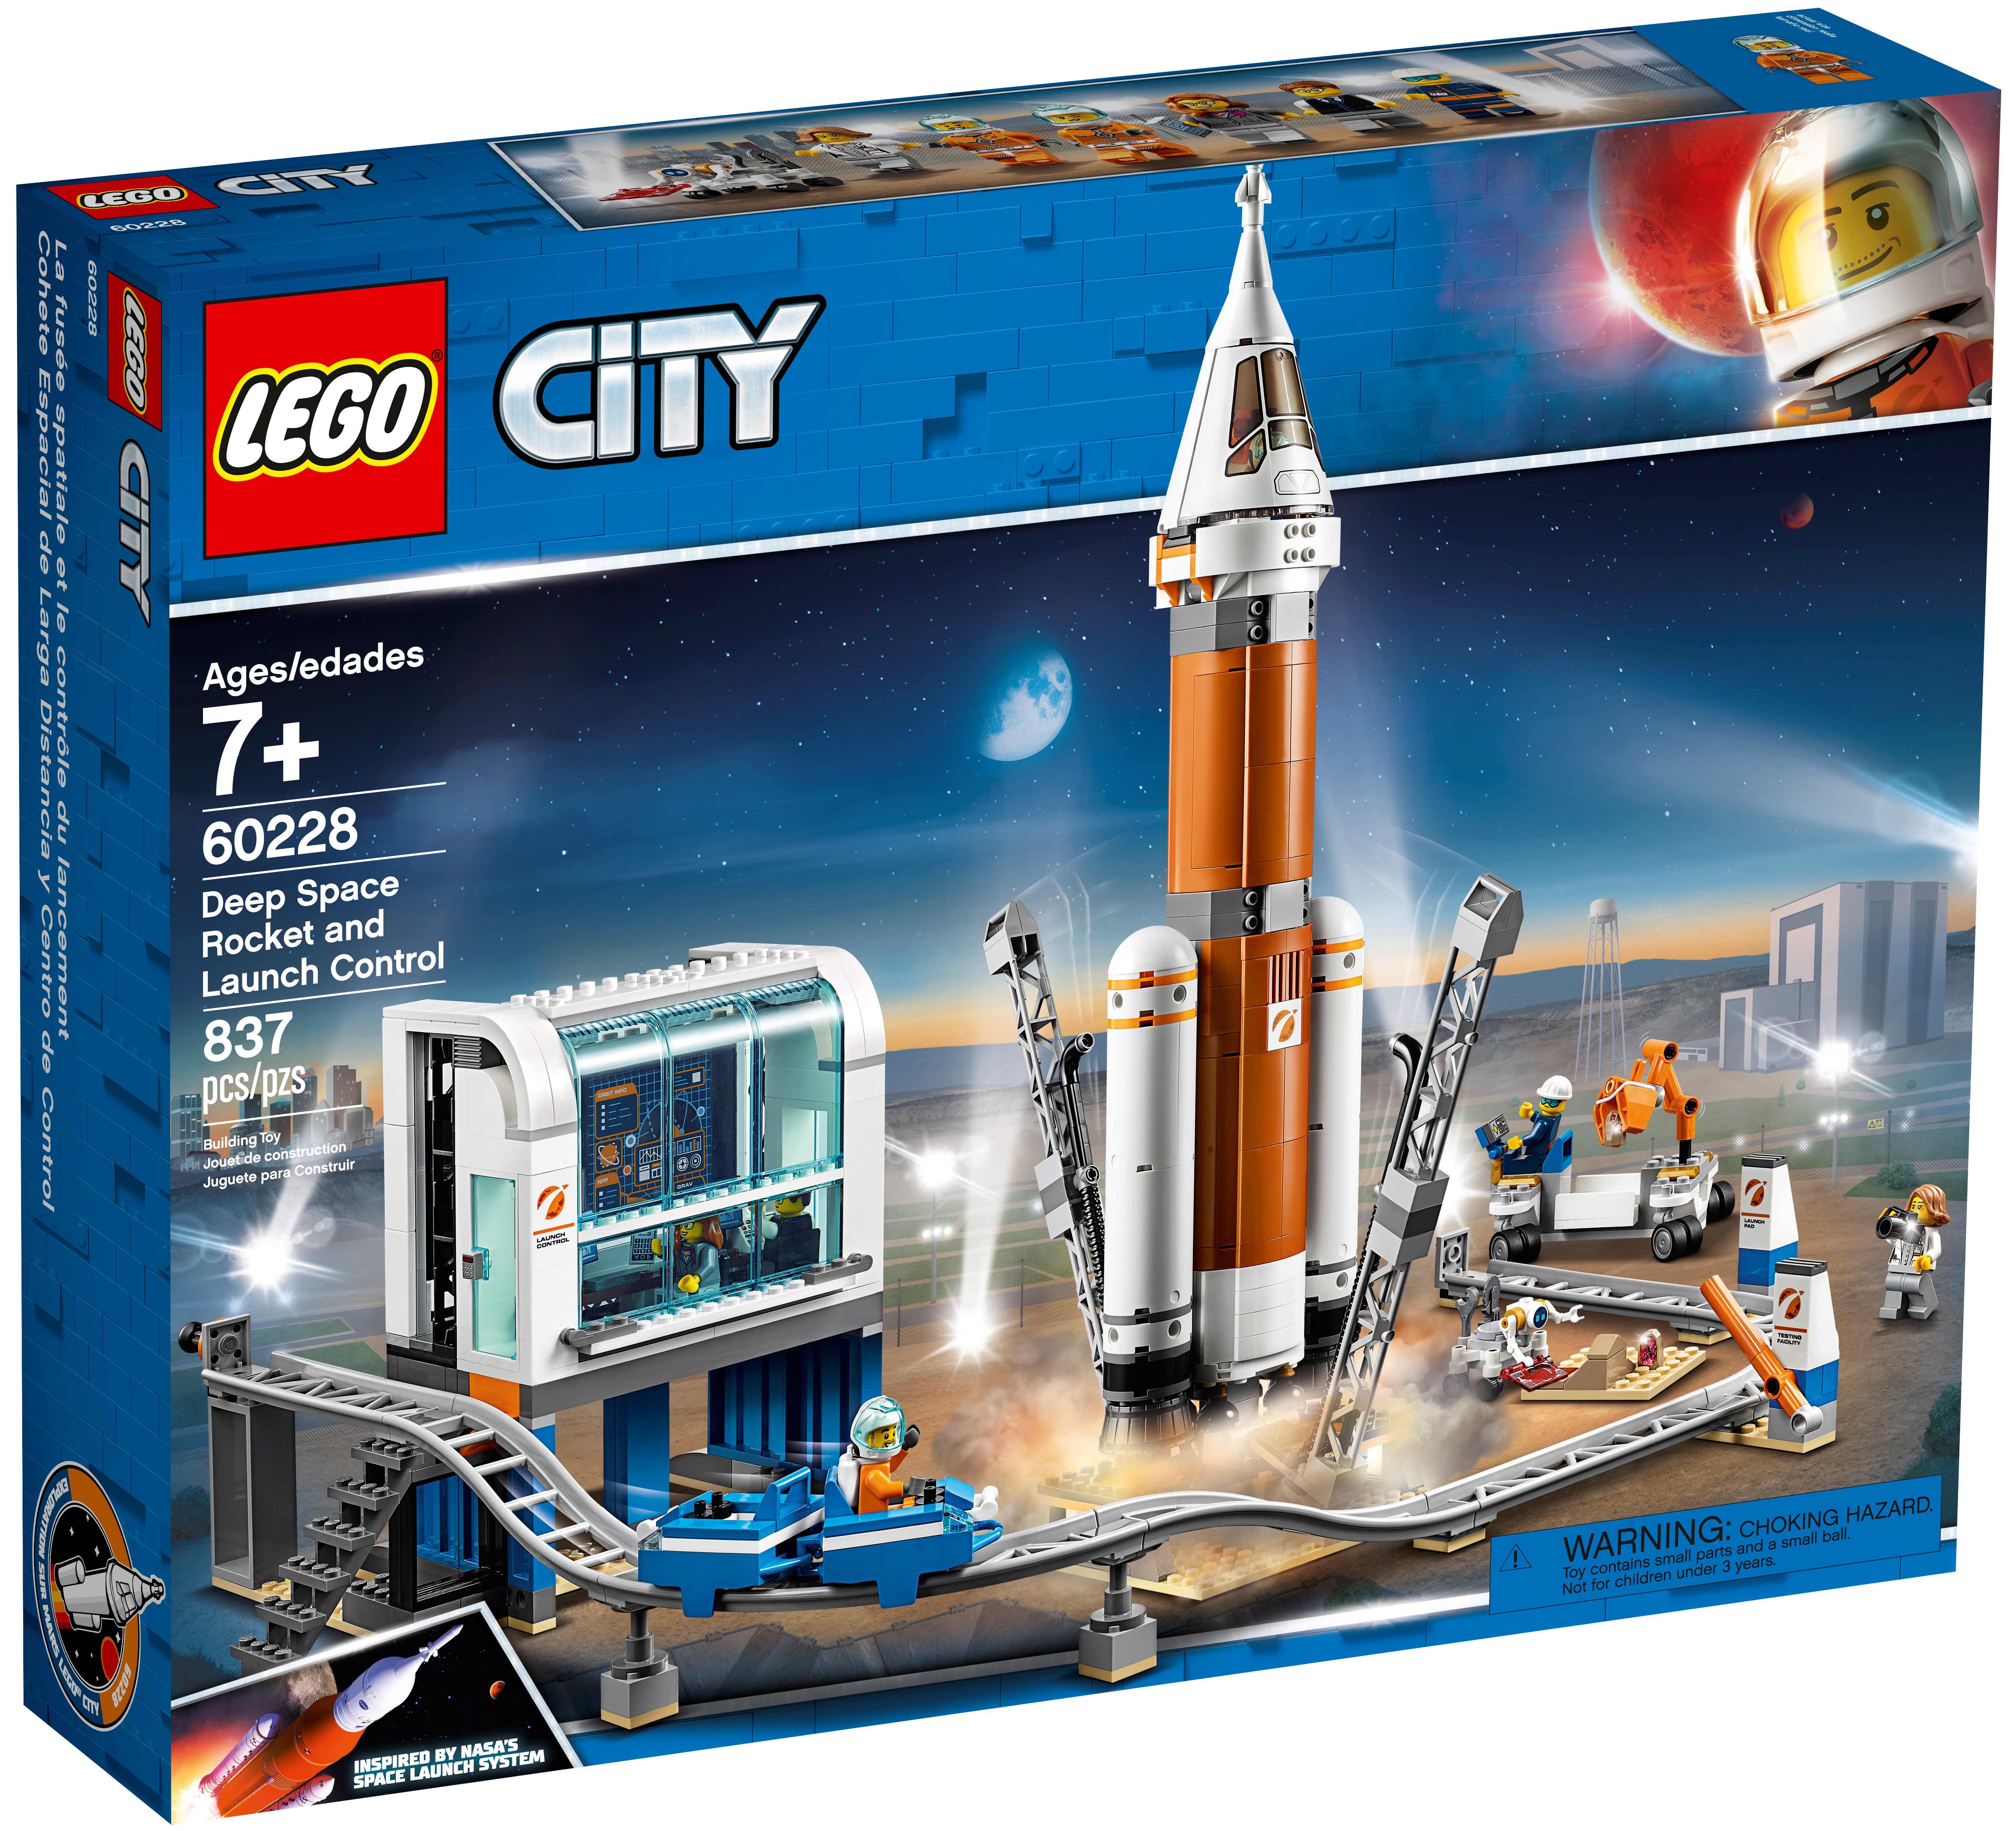 LEGO 60228 CITY Deep Space Rocket and Launch Control 